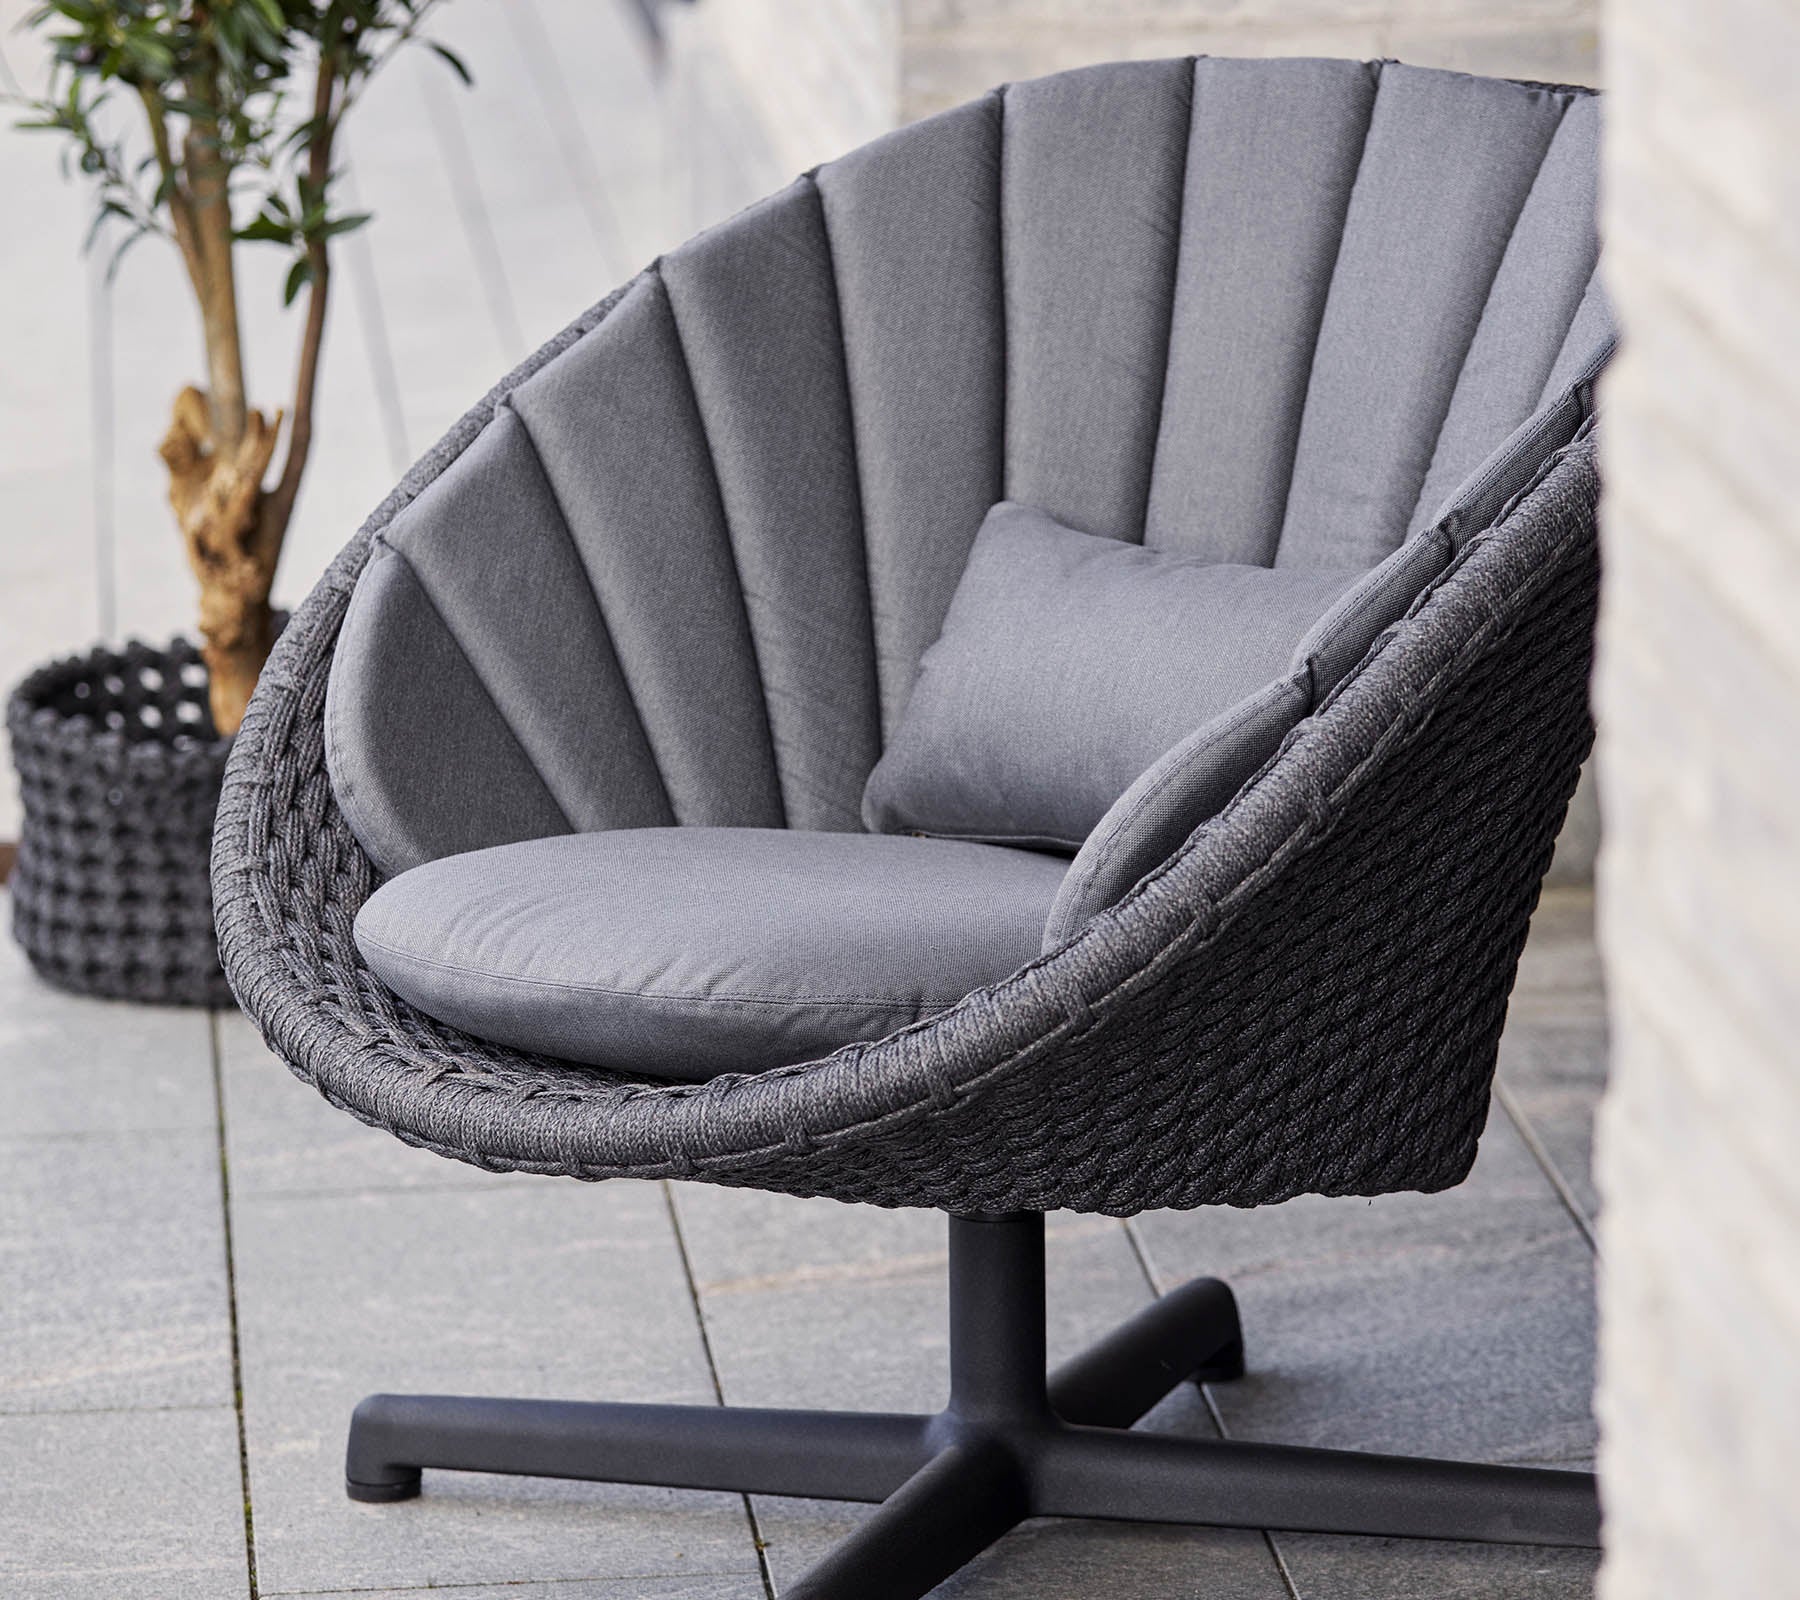 boxhill's peacock dark grey outdoor swivel lounge chair with dark grey cushion placed near to a plant in a dark grey basket